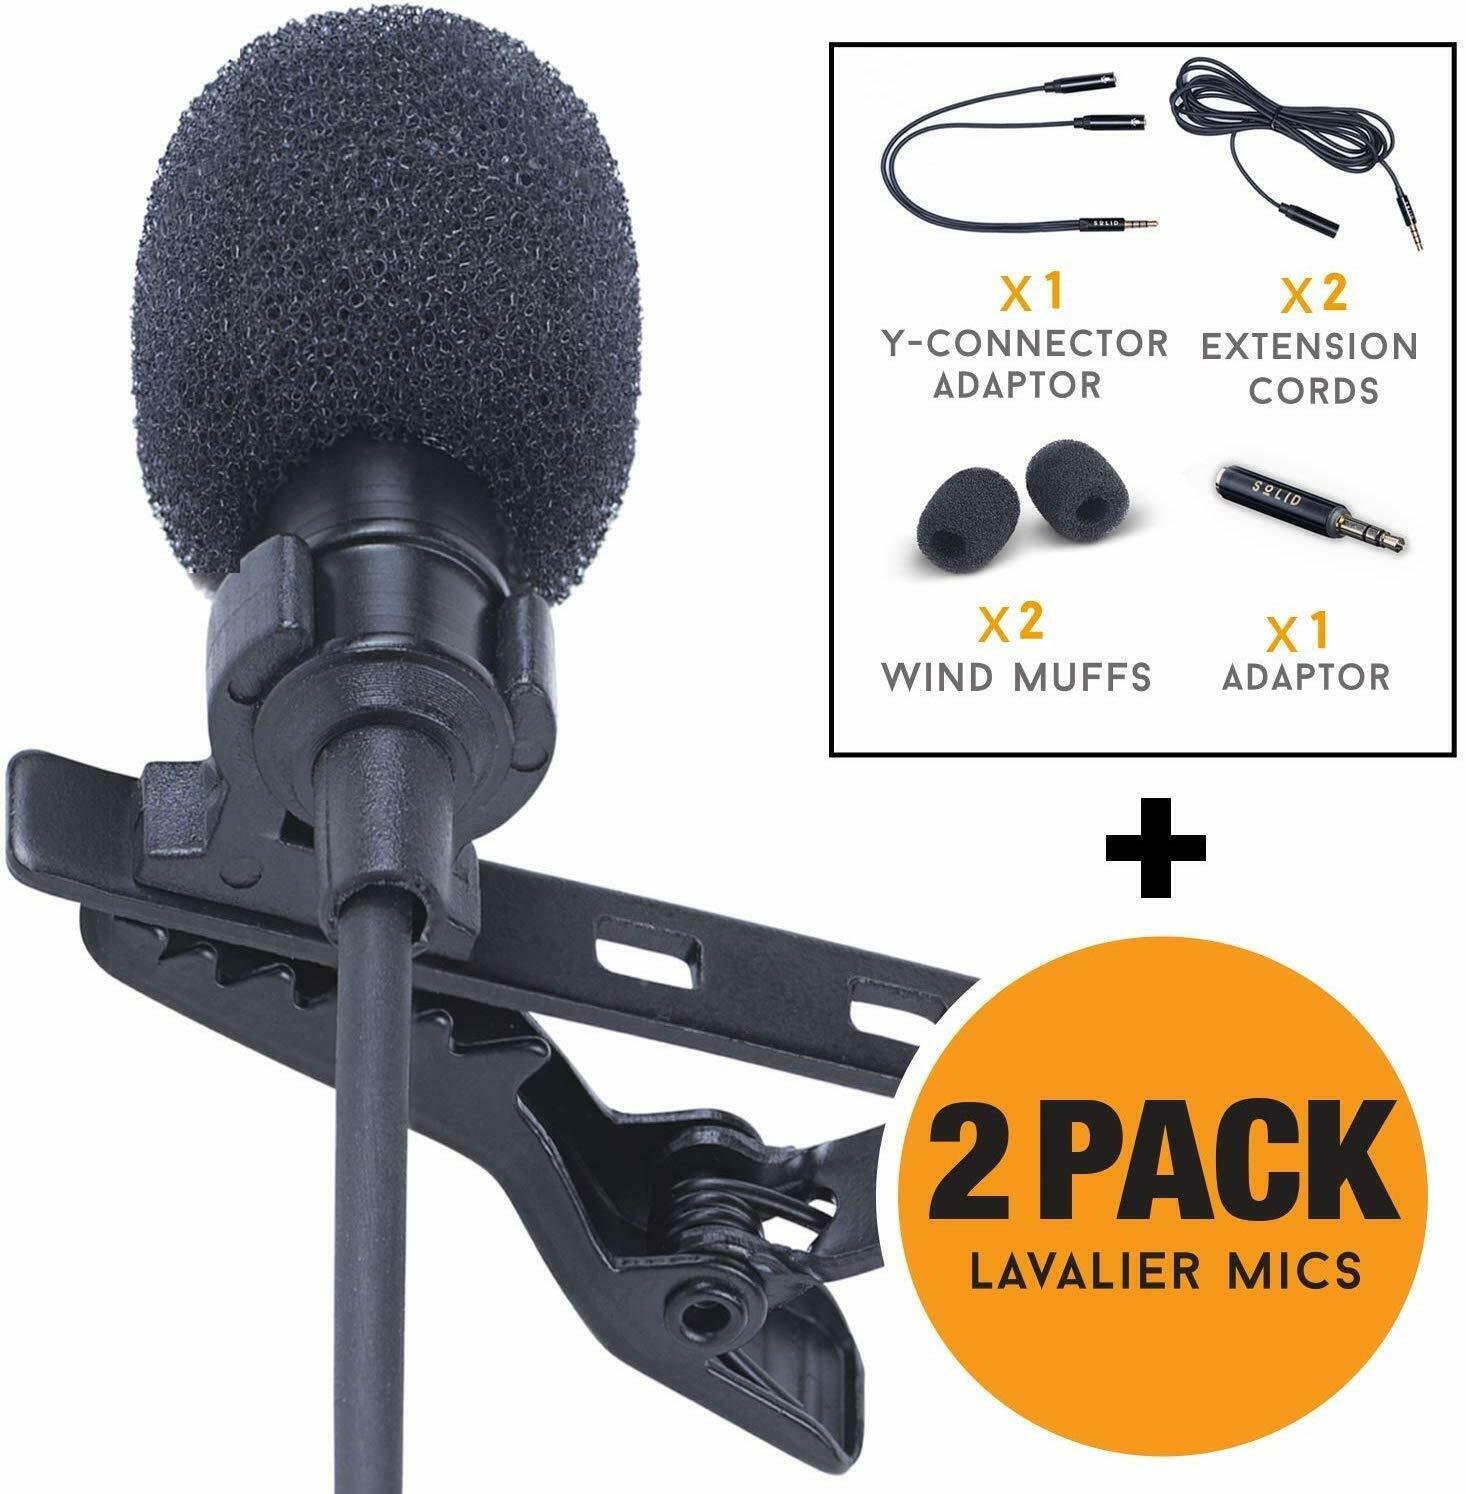 Lapel Microphone Lavalier Mic 2-pack - Compatible With Most Devices, Hands Free